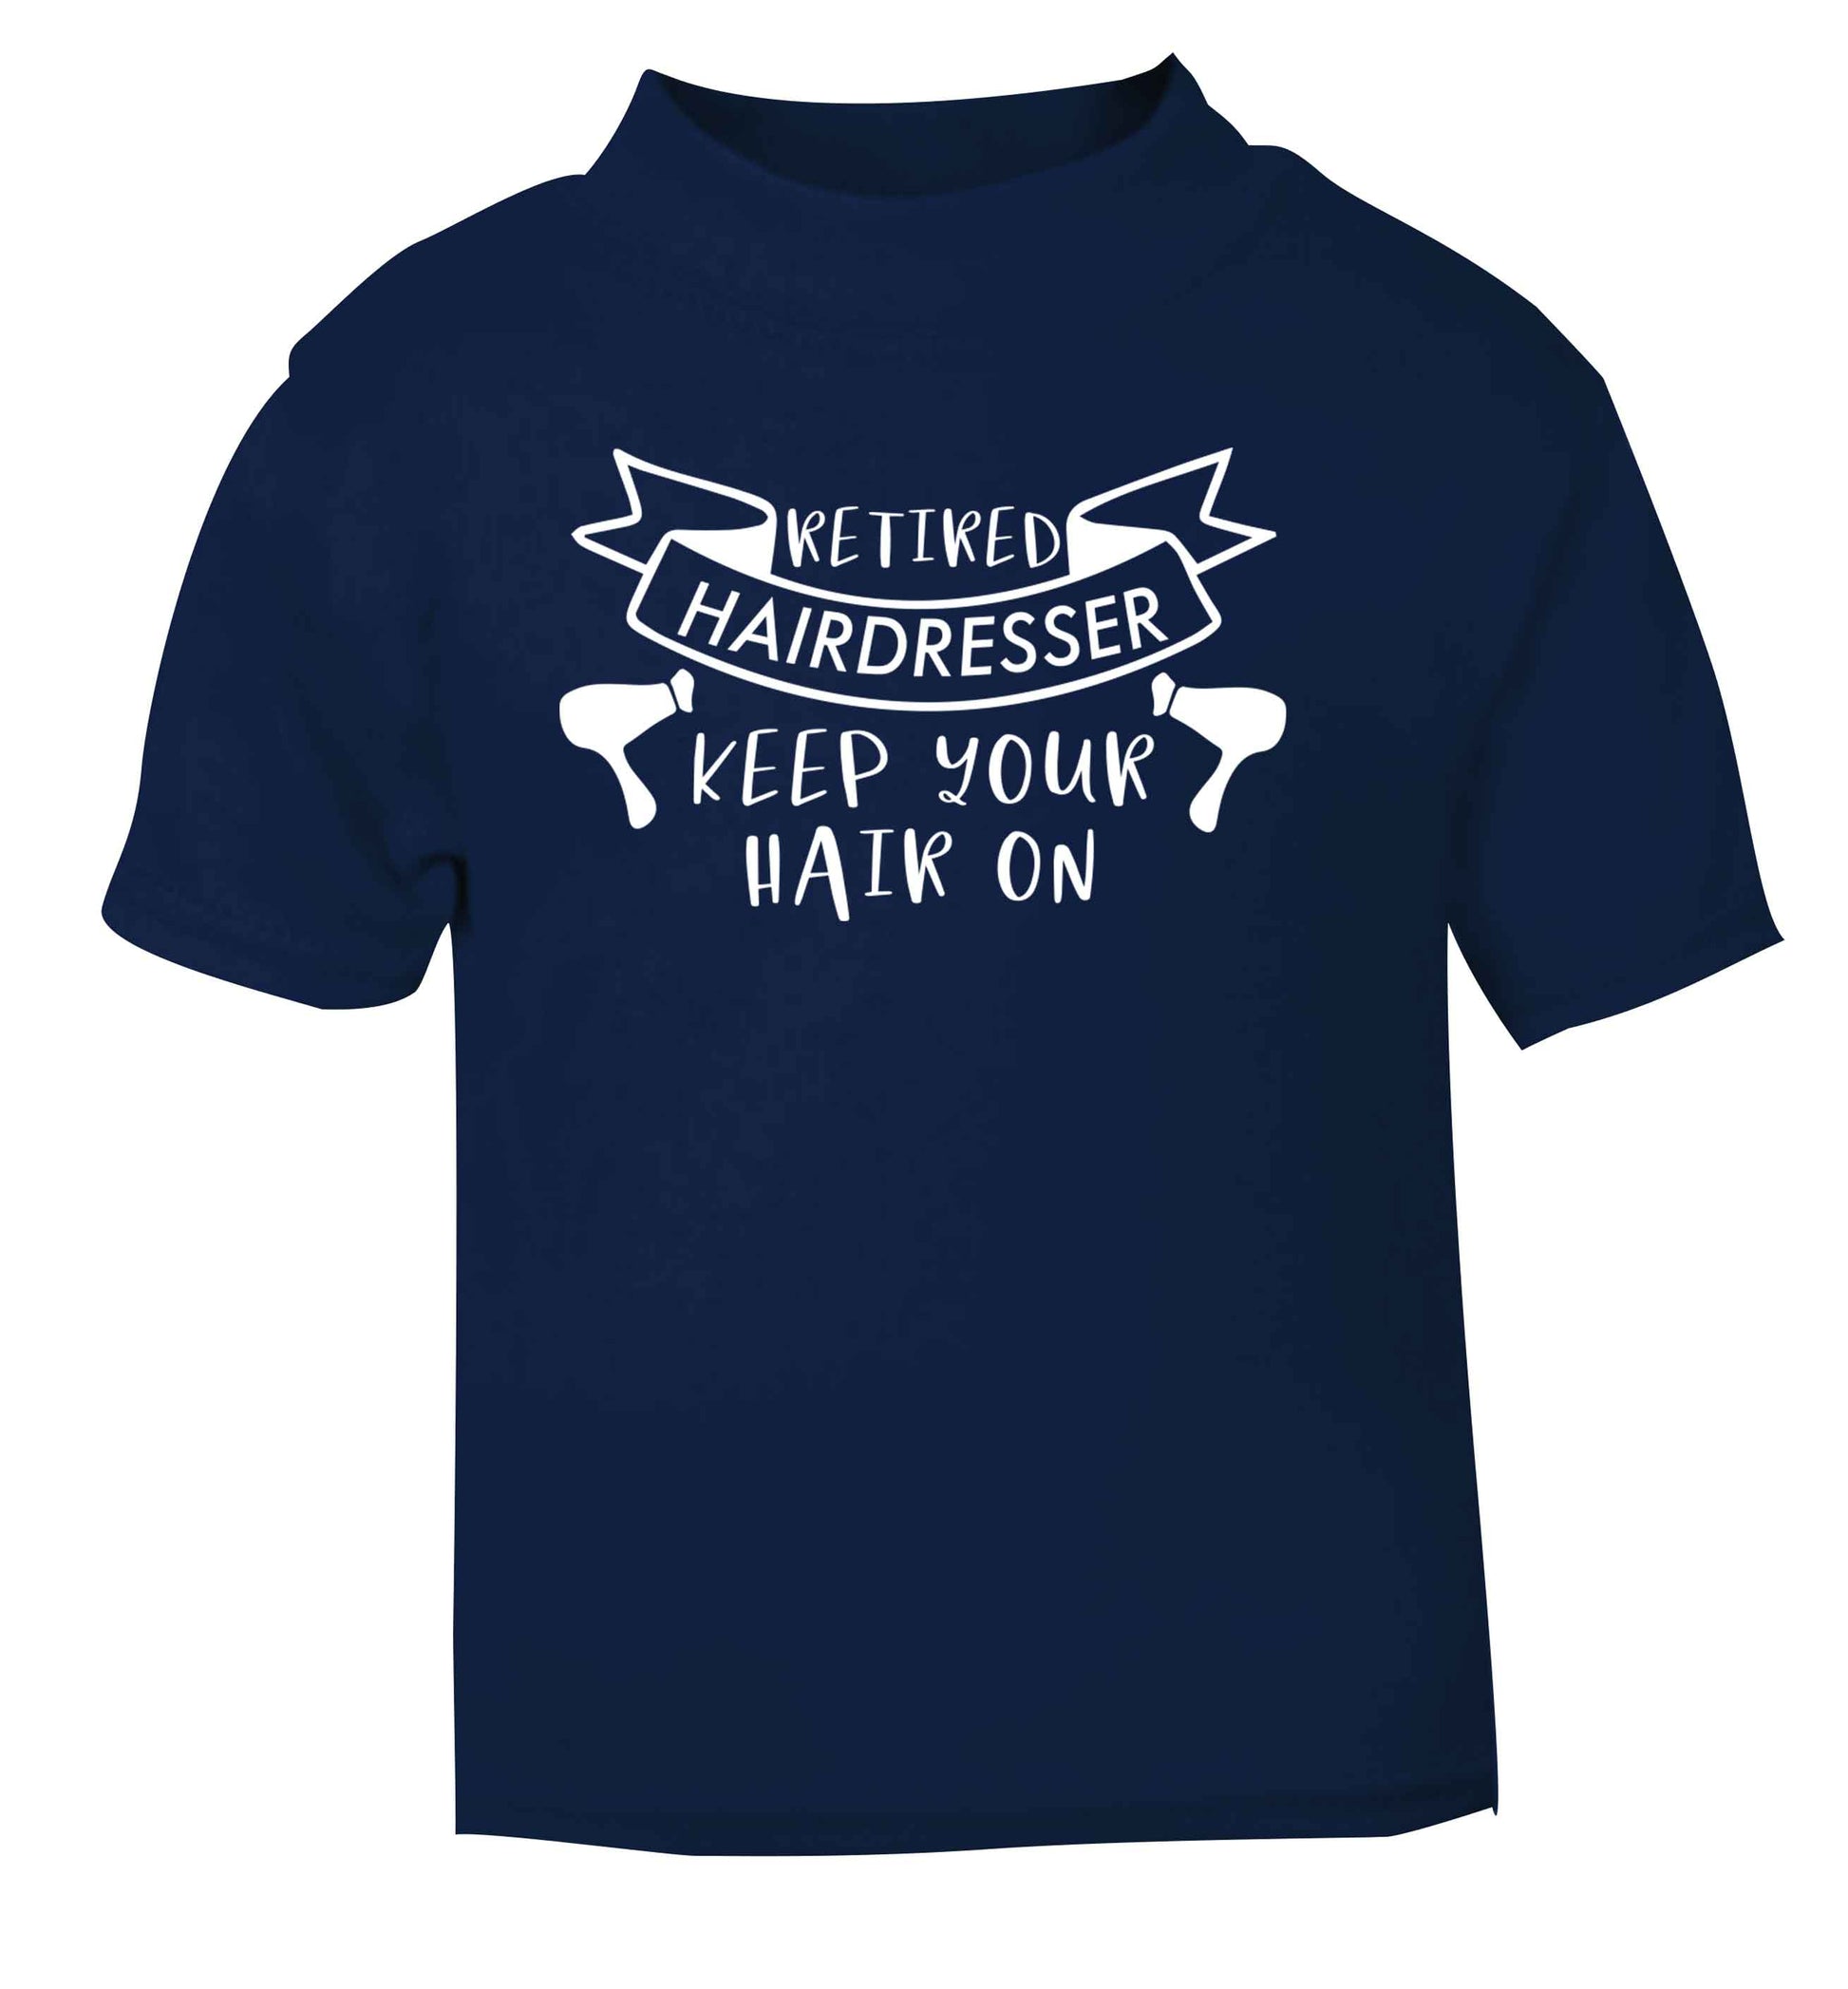 Retired hairdresser keep your hair on navy Baby Toddler Tshirt 2 Years